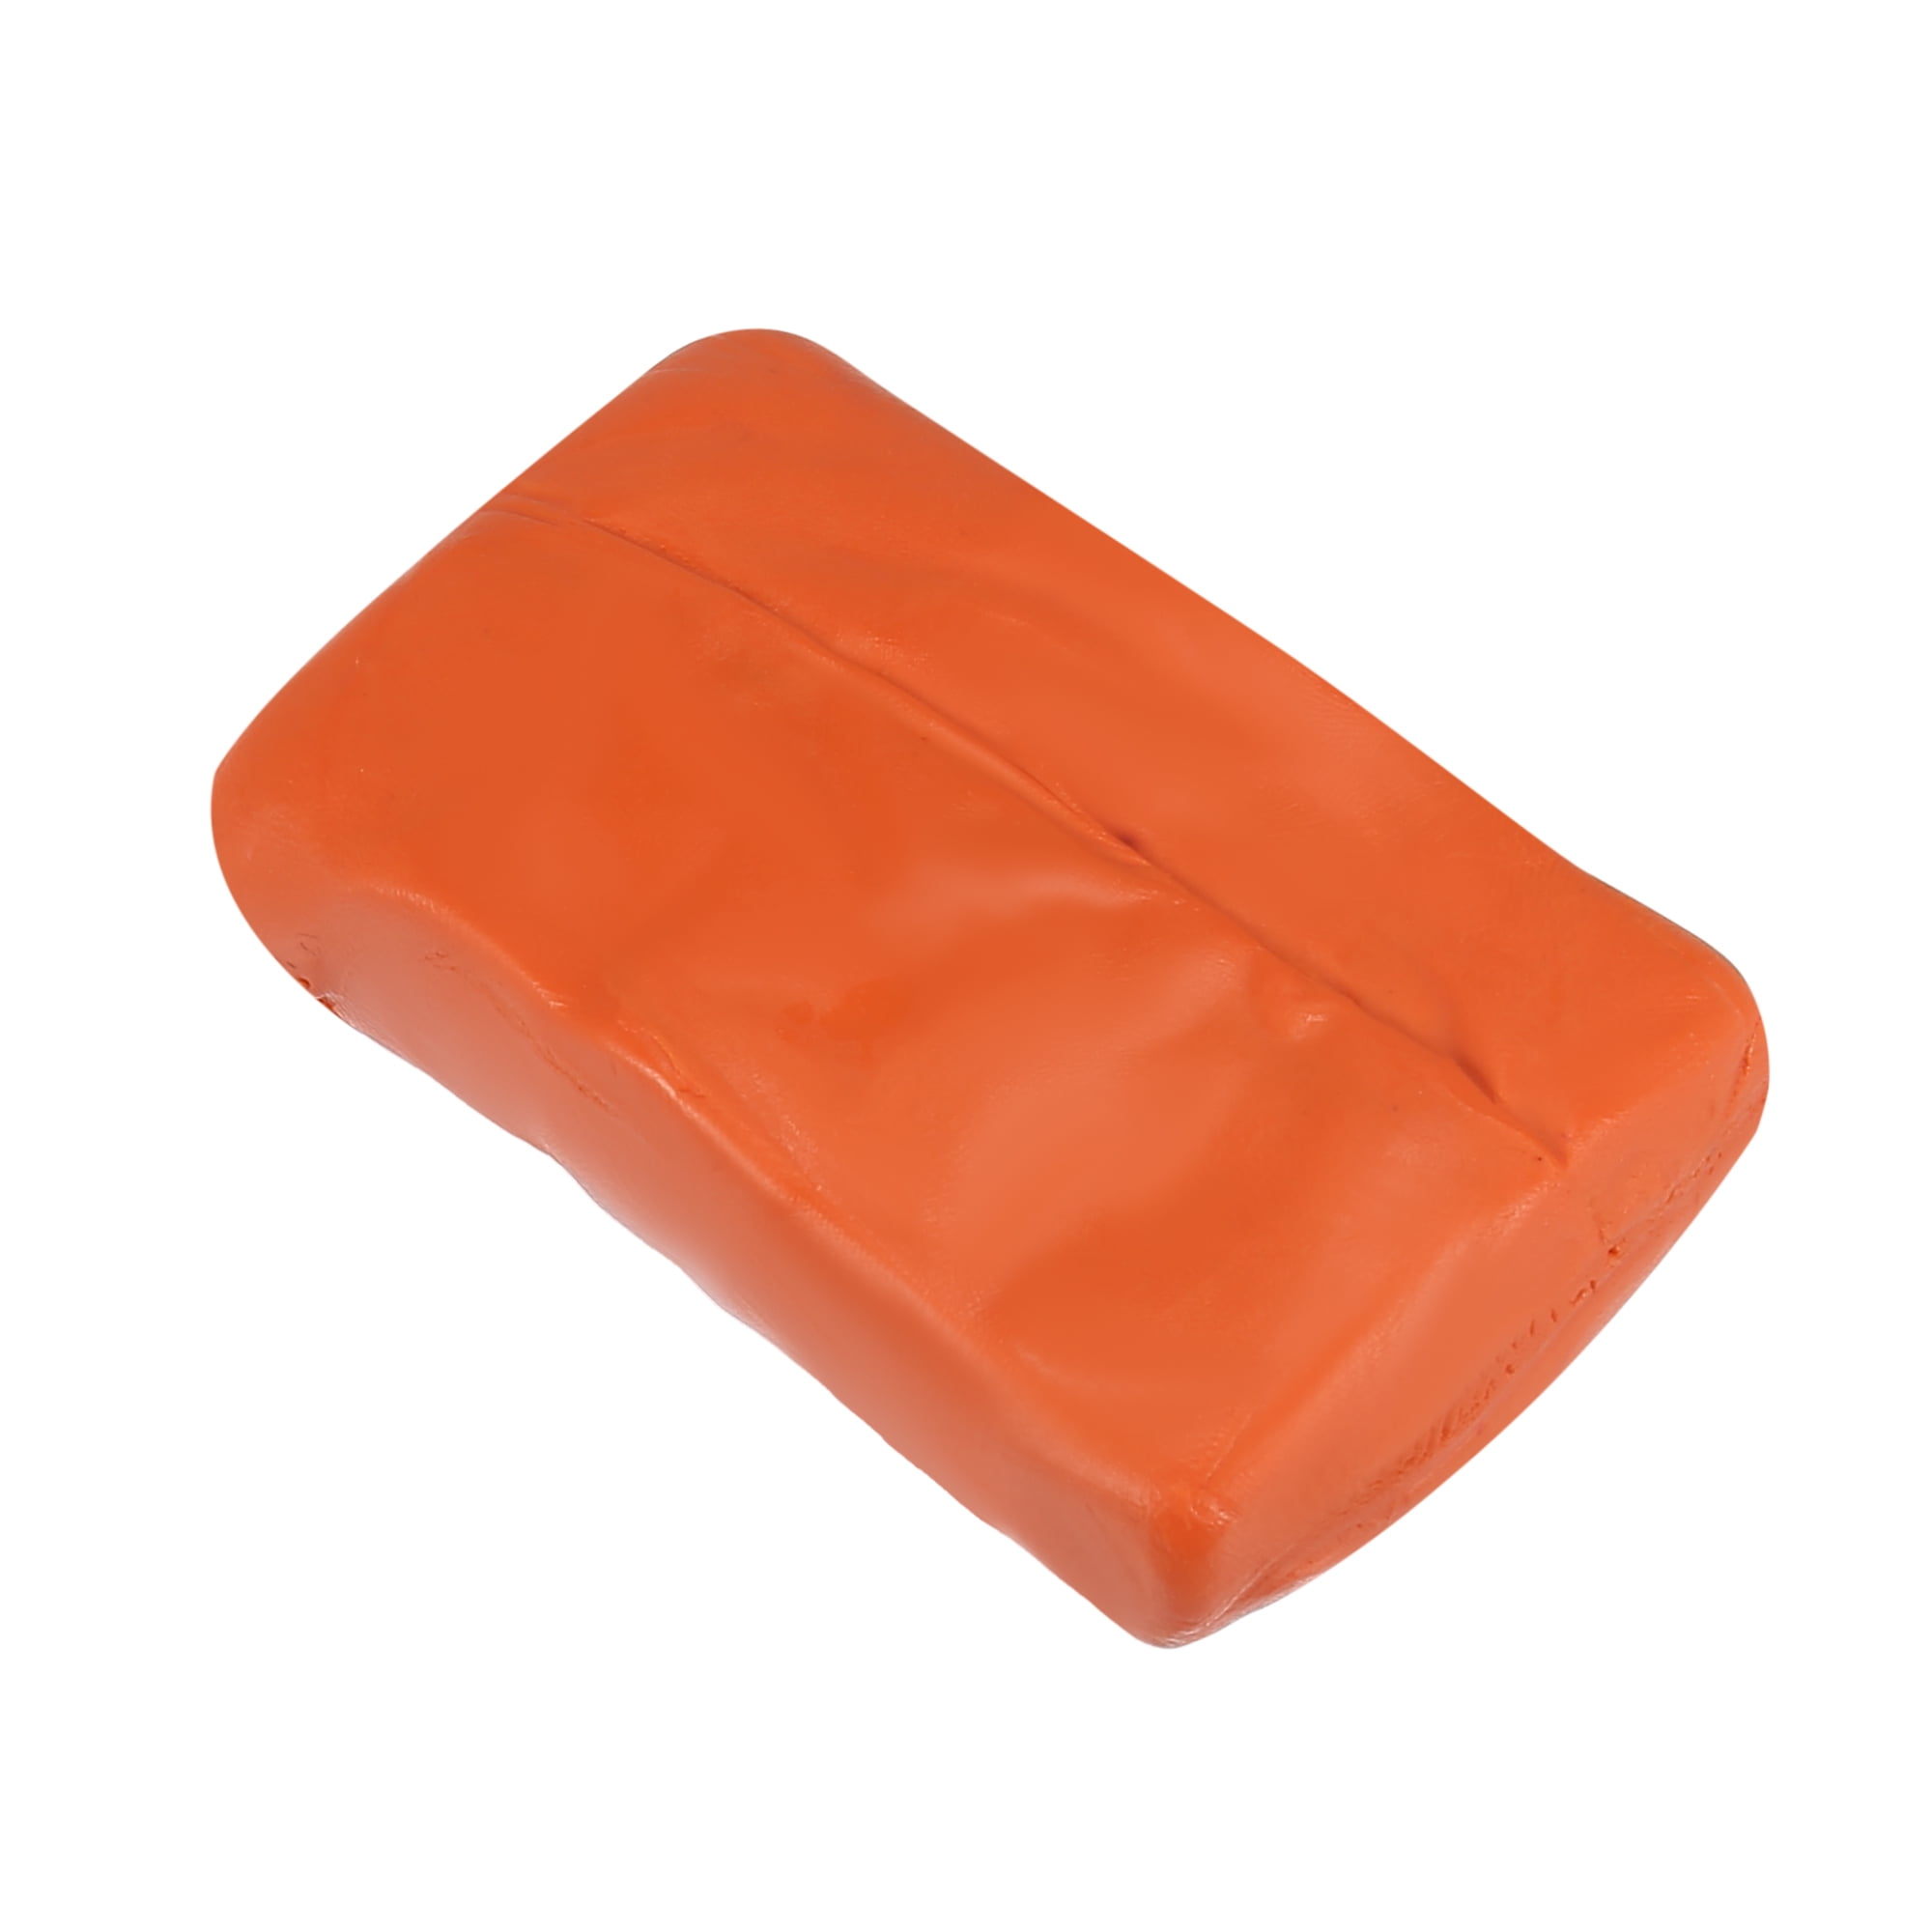 2 Pack 100g Car Clay Bar Sponges For Auto Detailing And Cleaning From  Paping, $21.65